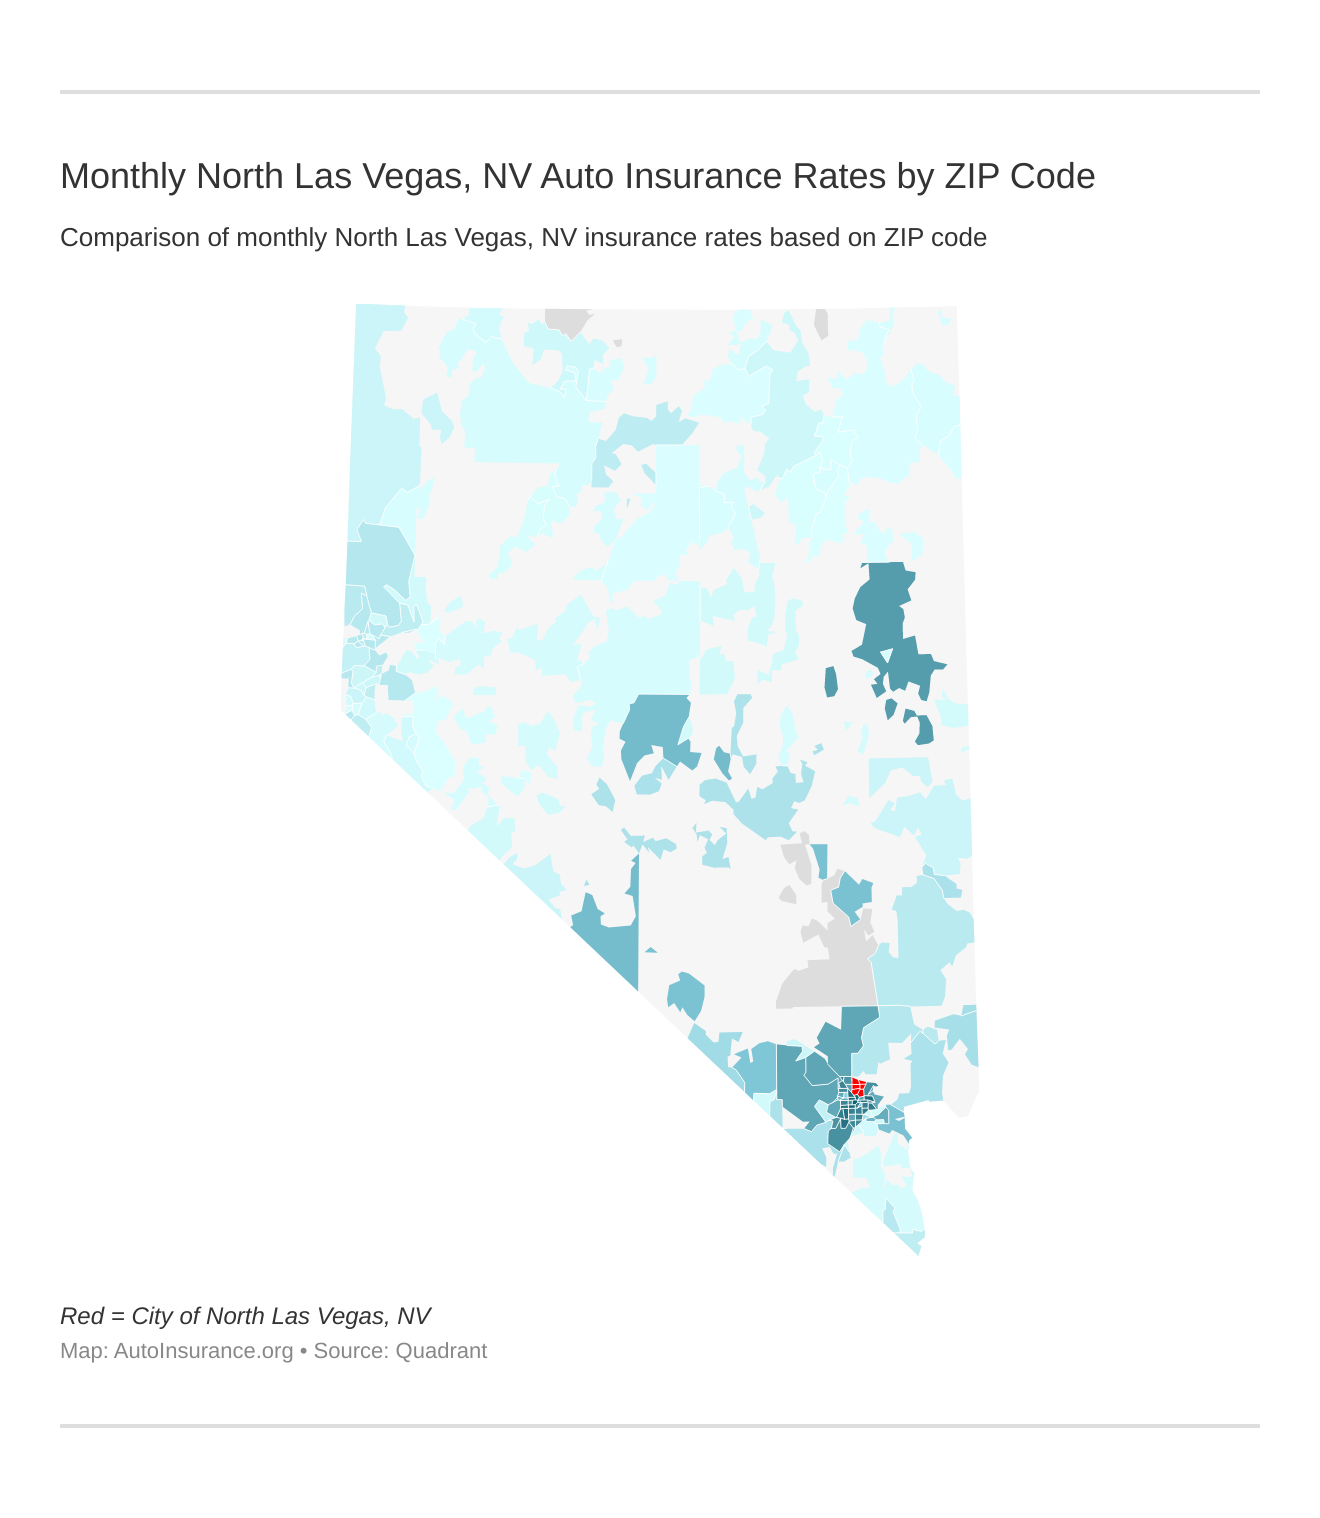 Monthly North Las Vegas, NV Auto Insurance Rates by ZIP Code